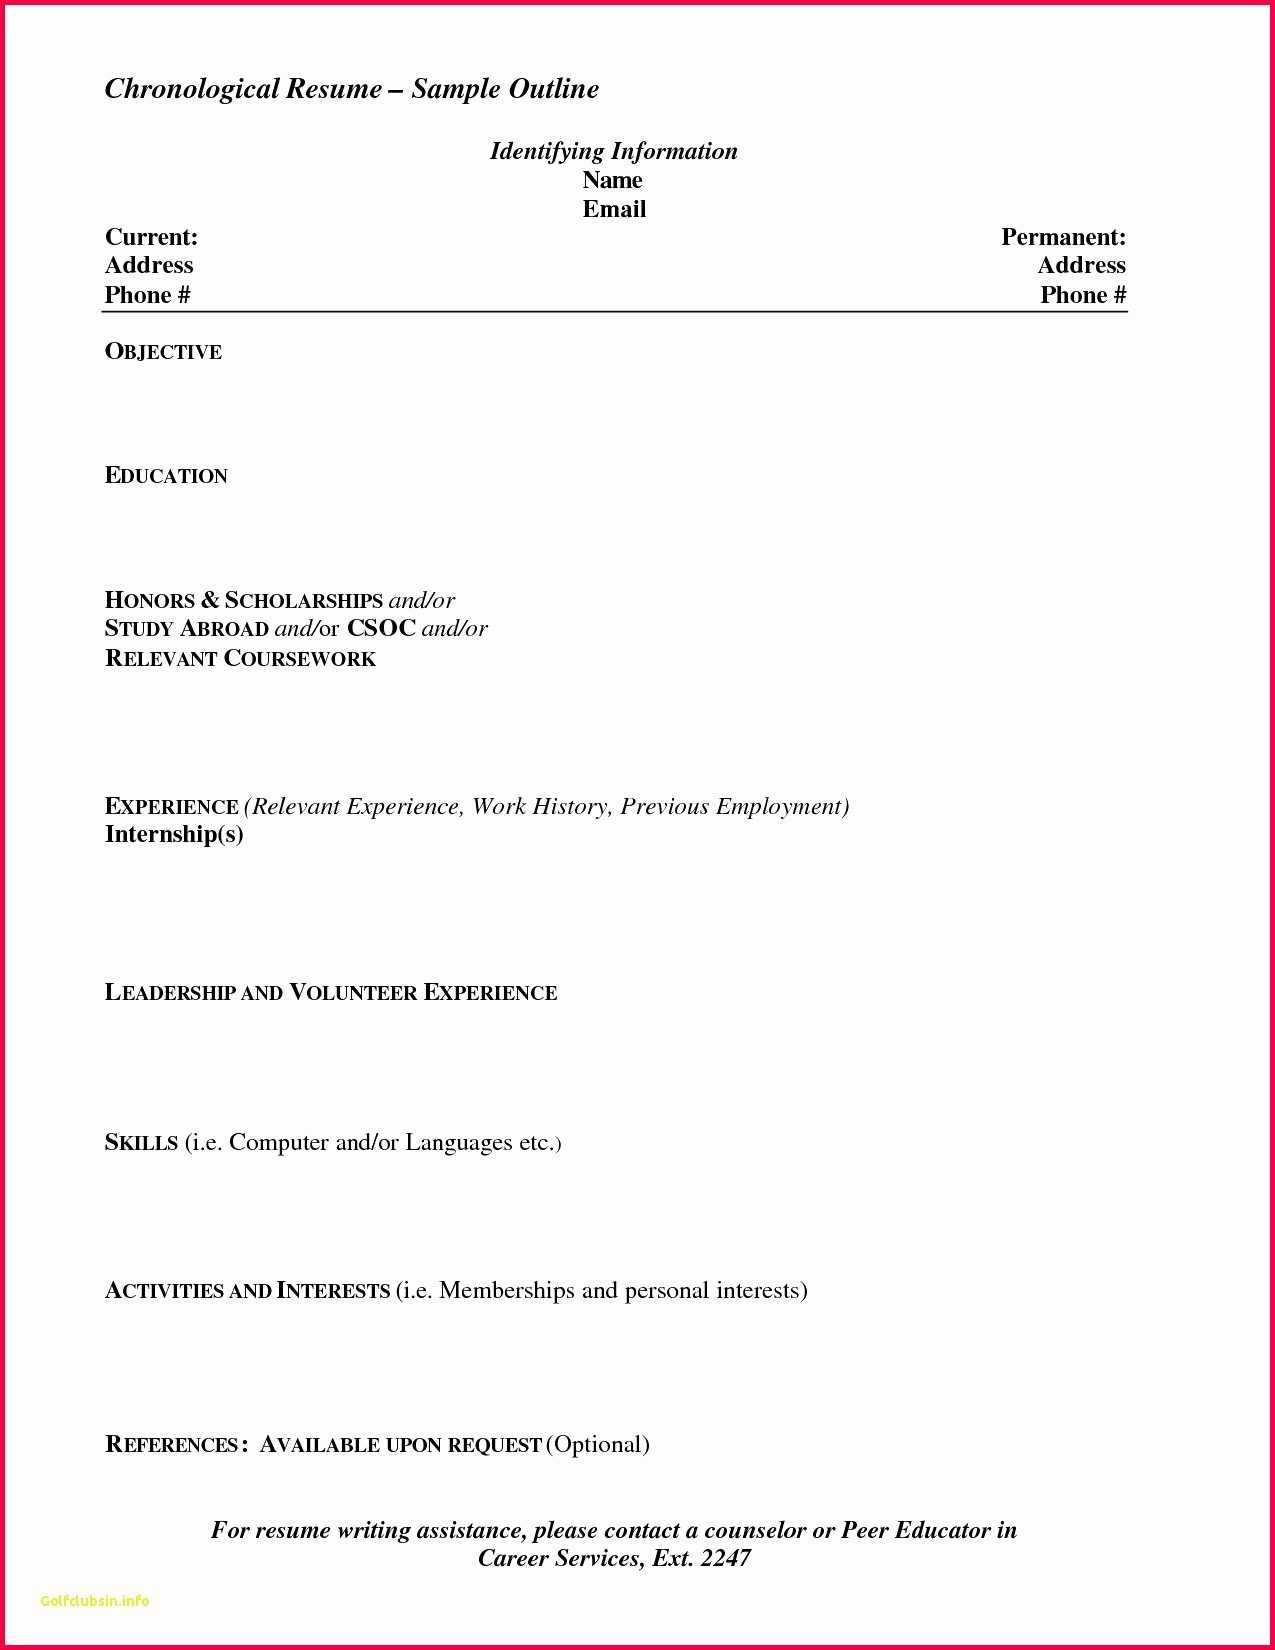 Fill In the Blank Resume Worksheet Also Printable Resume Worksheet Myacereporter Myacereporter